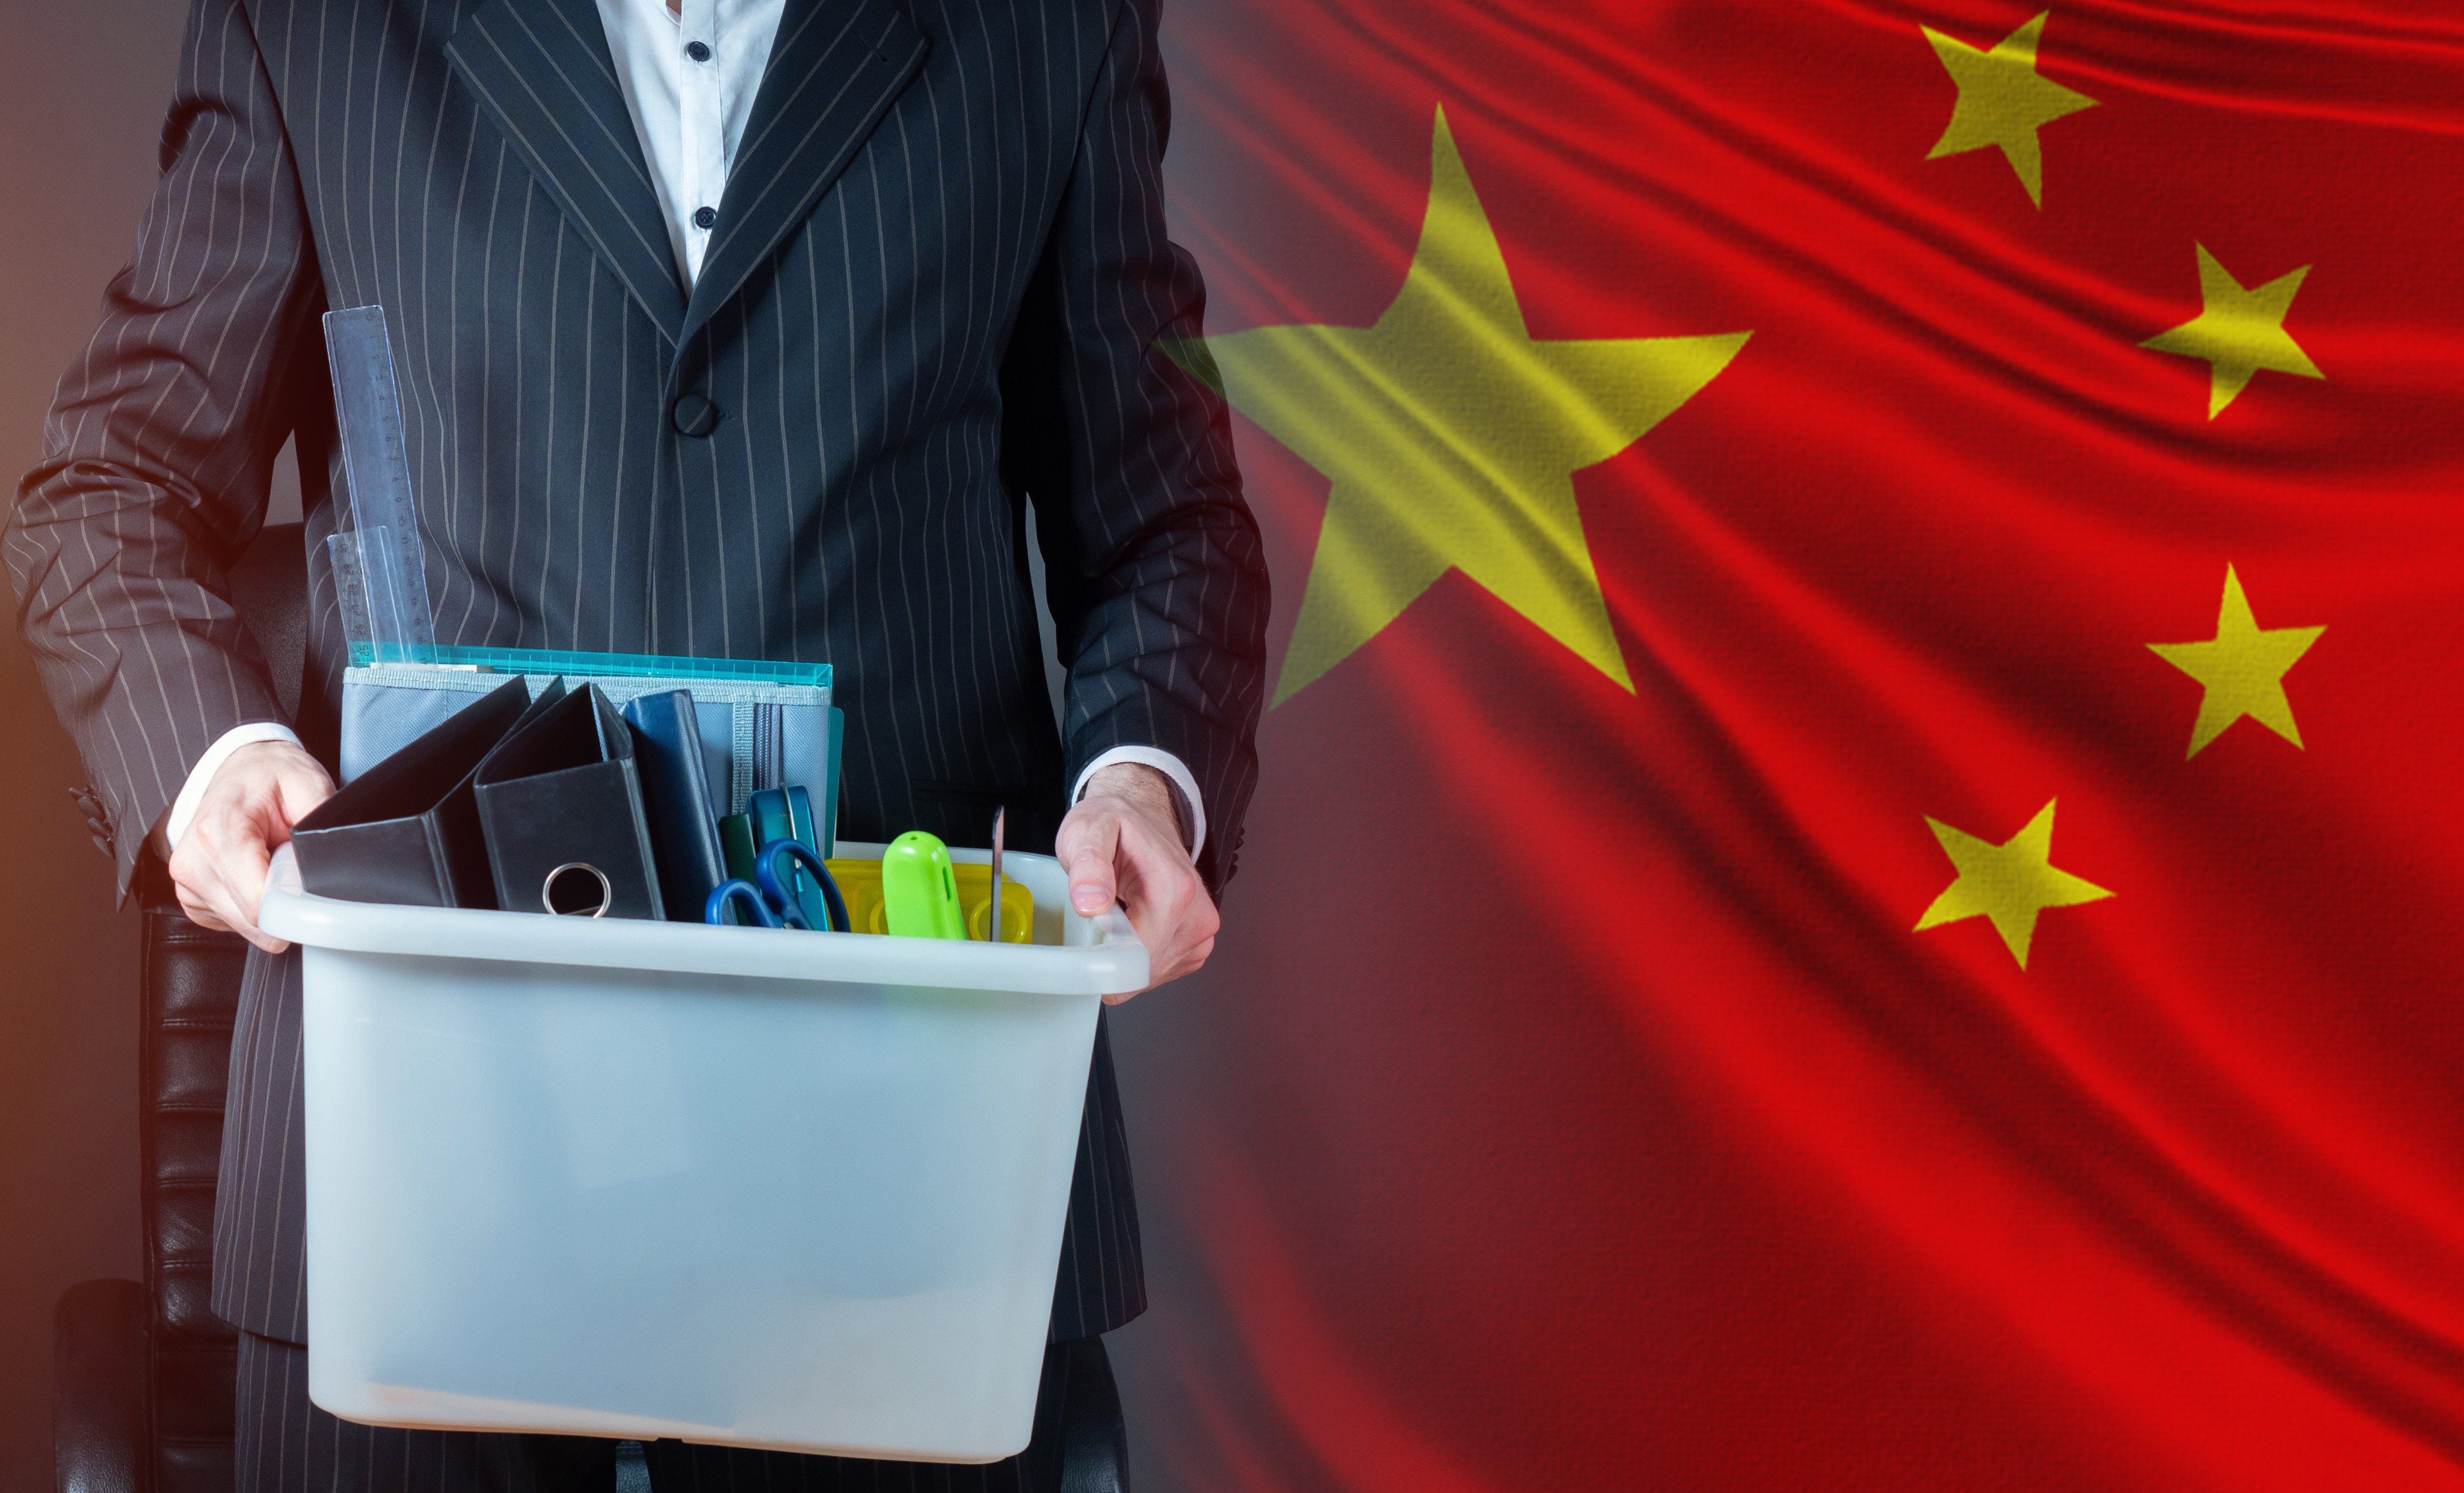 A number of multinational Big Tech companies are shedding more jobs on the mainland. Photo: Shutterstock